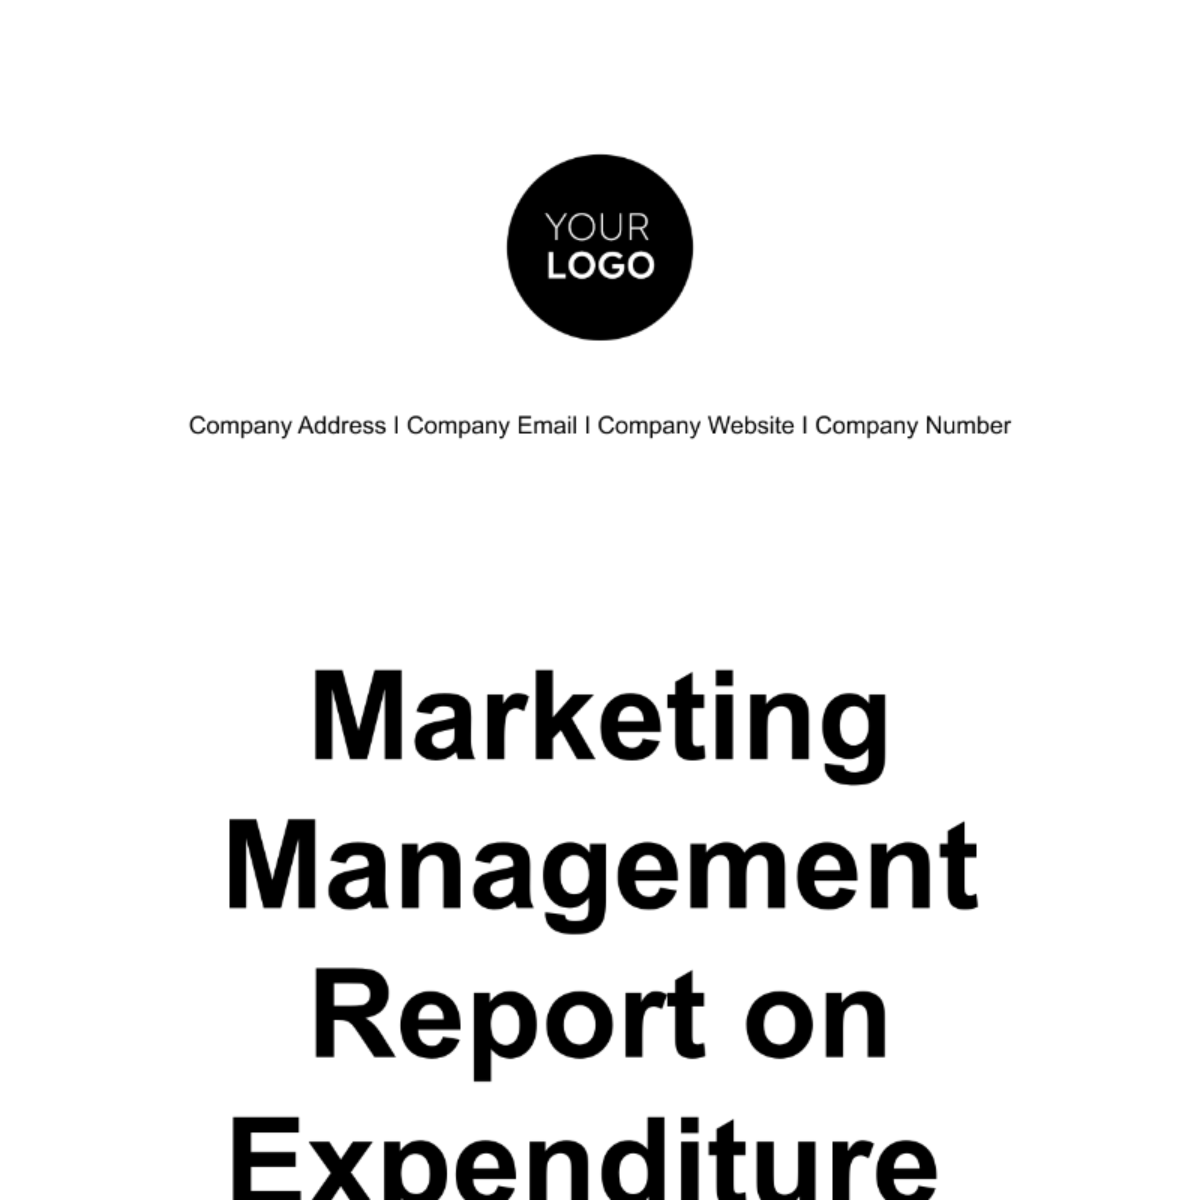 Free Marketing Management Report on Expenditure Template